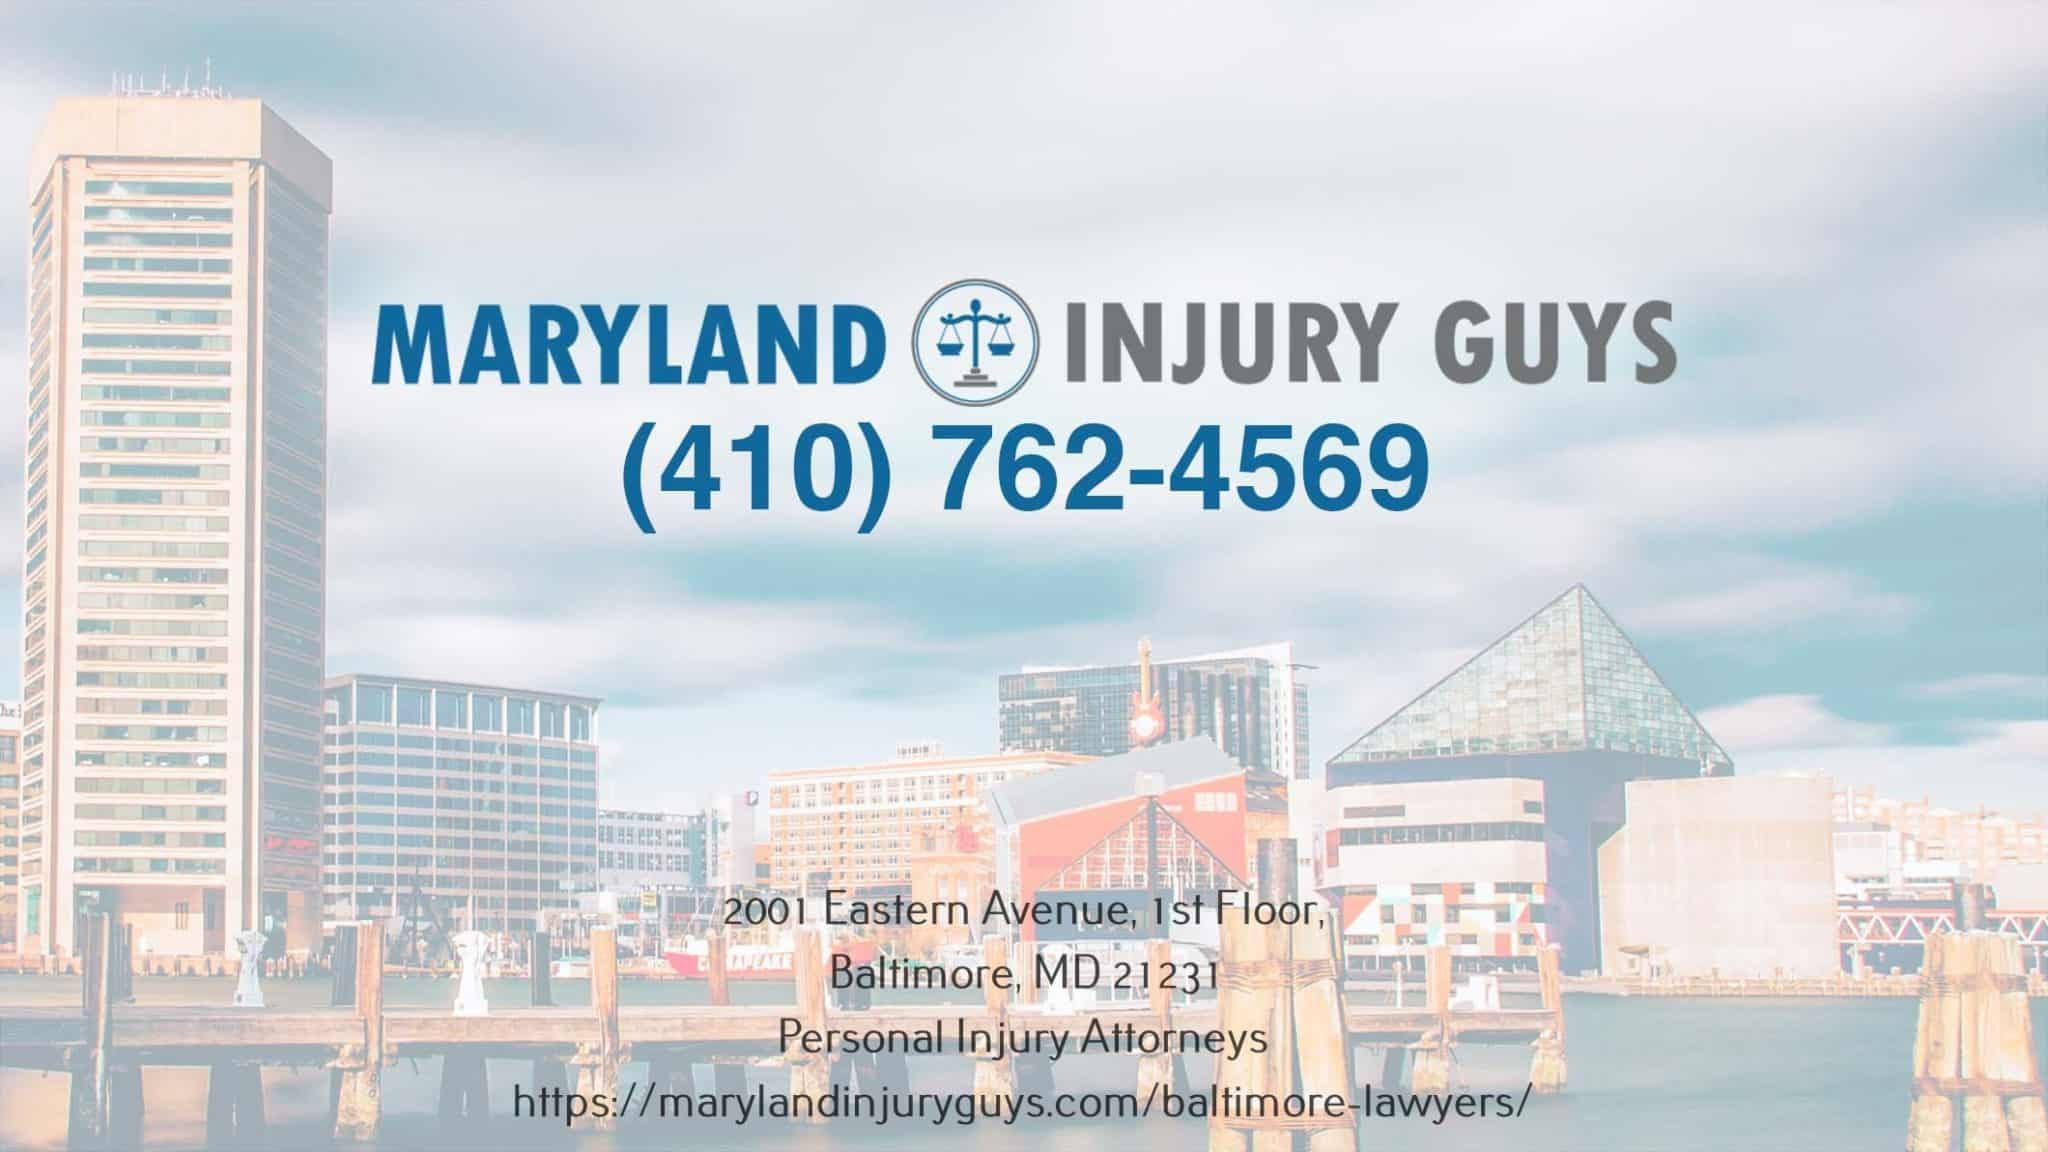 Call Baltimore Personal Injury Attorney For Free Consultations After Dog Bites